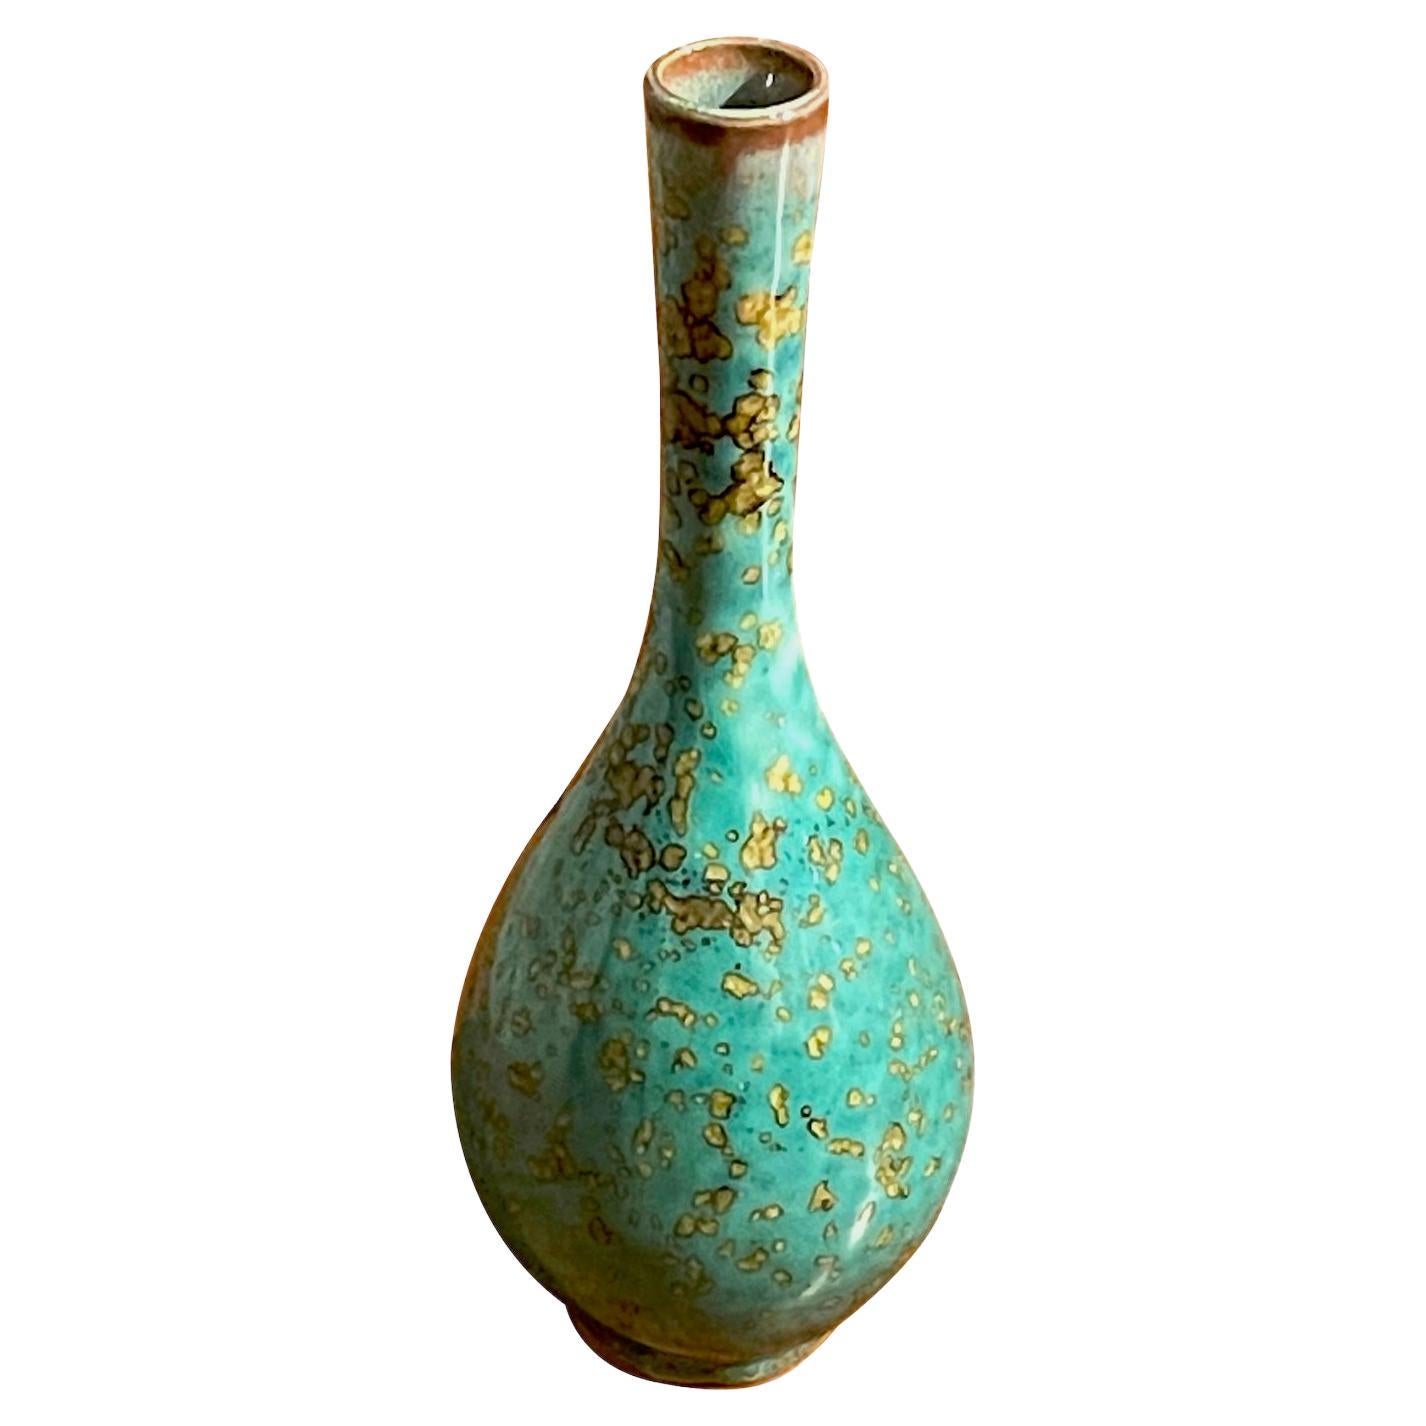 Turquoise with Gold Speckled Glaze Tall Thin Vase, China, Contemporary